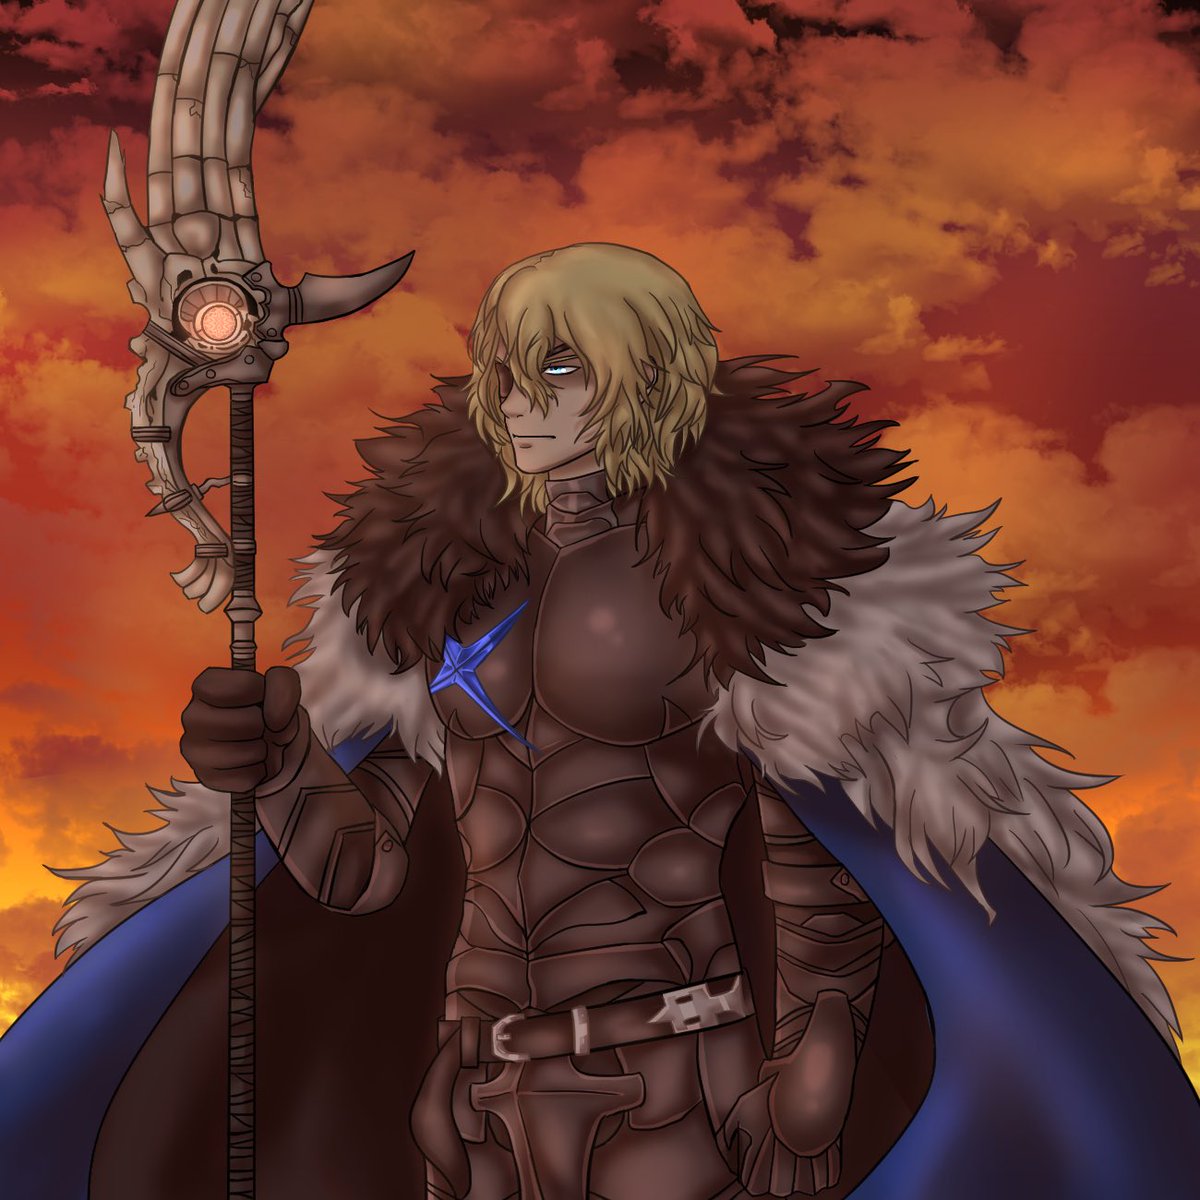 Dimitri from Fire Emblem Three Houses. All hail the Holy Kingdom of Faerghus!
#fireemblemthreehouses #fireemblem #dimitrifireemblem #dimitrifireemblemthreehouses #dimitrifireemblemfanart #dimitrifireemblem3houses #dimitrifireemblemart